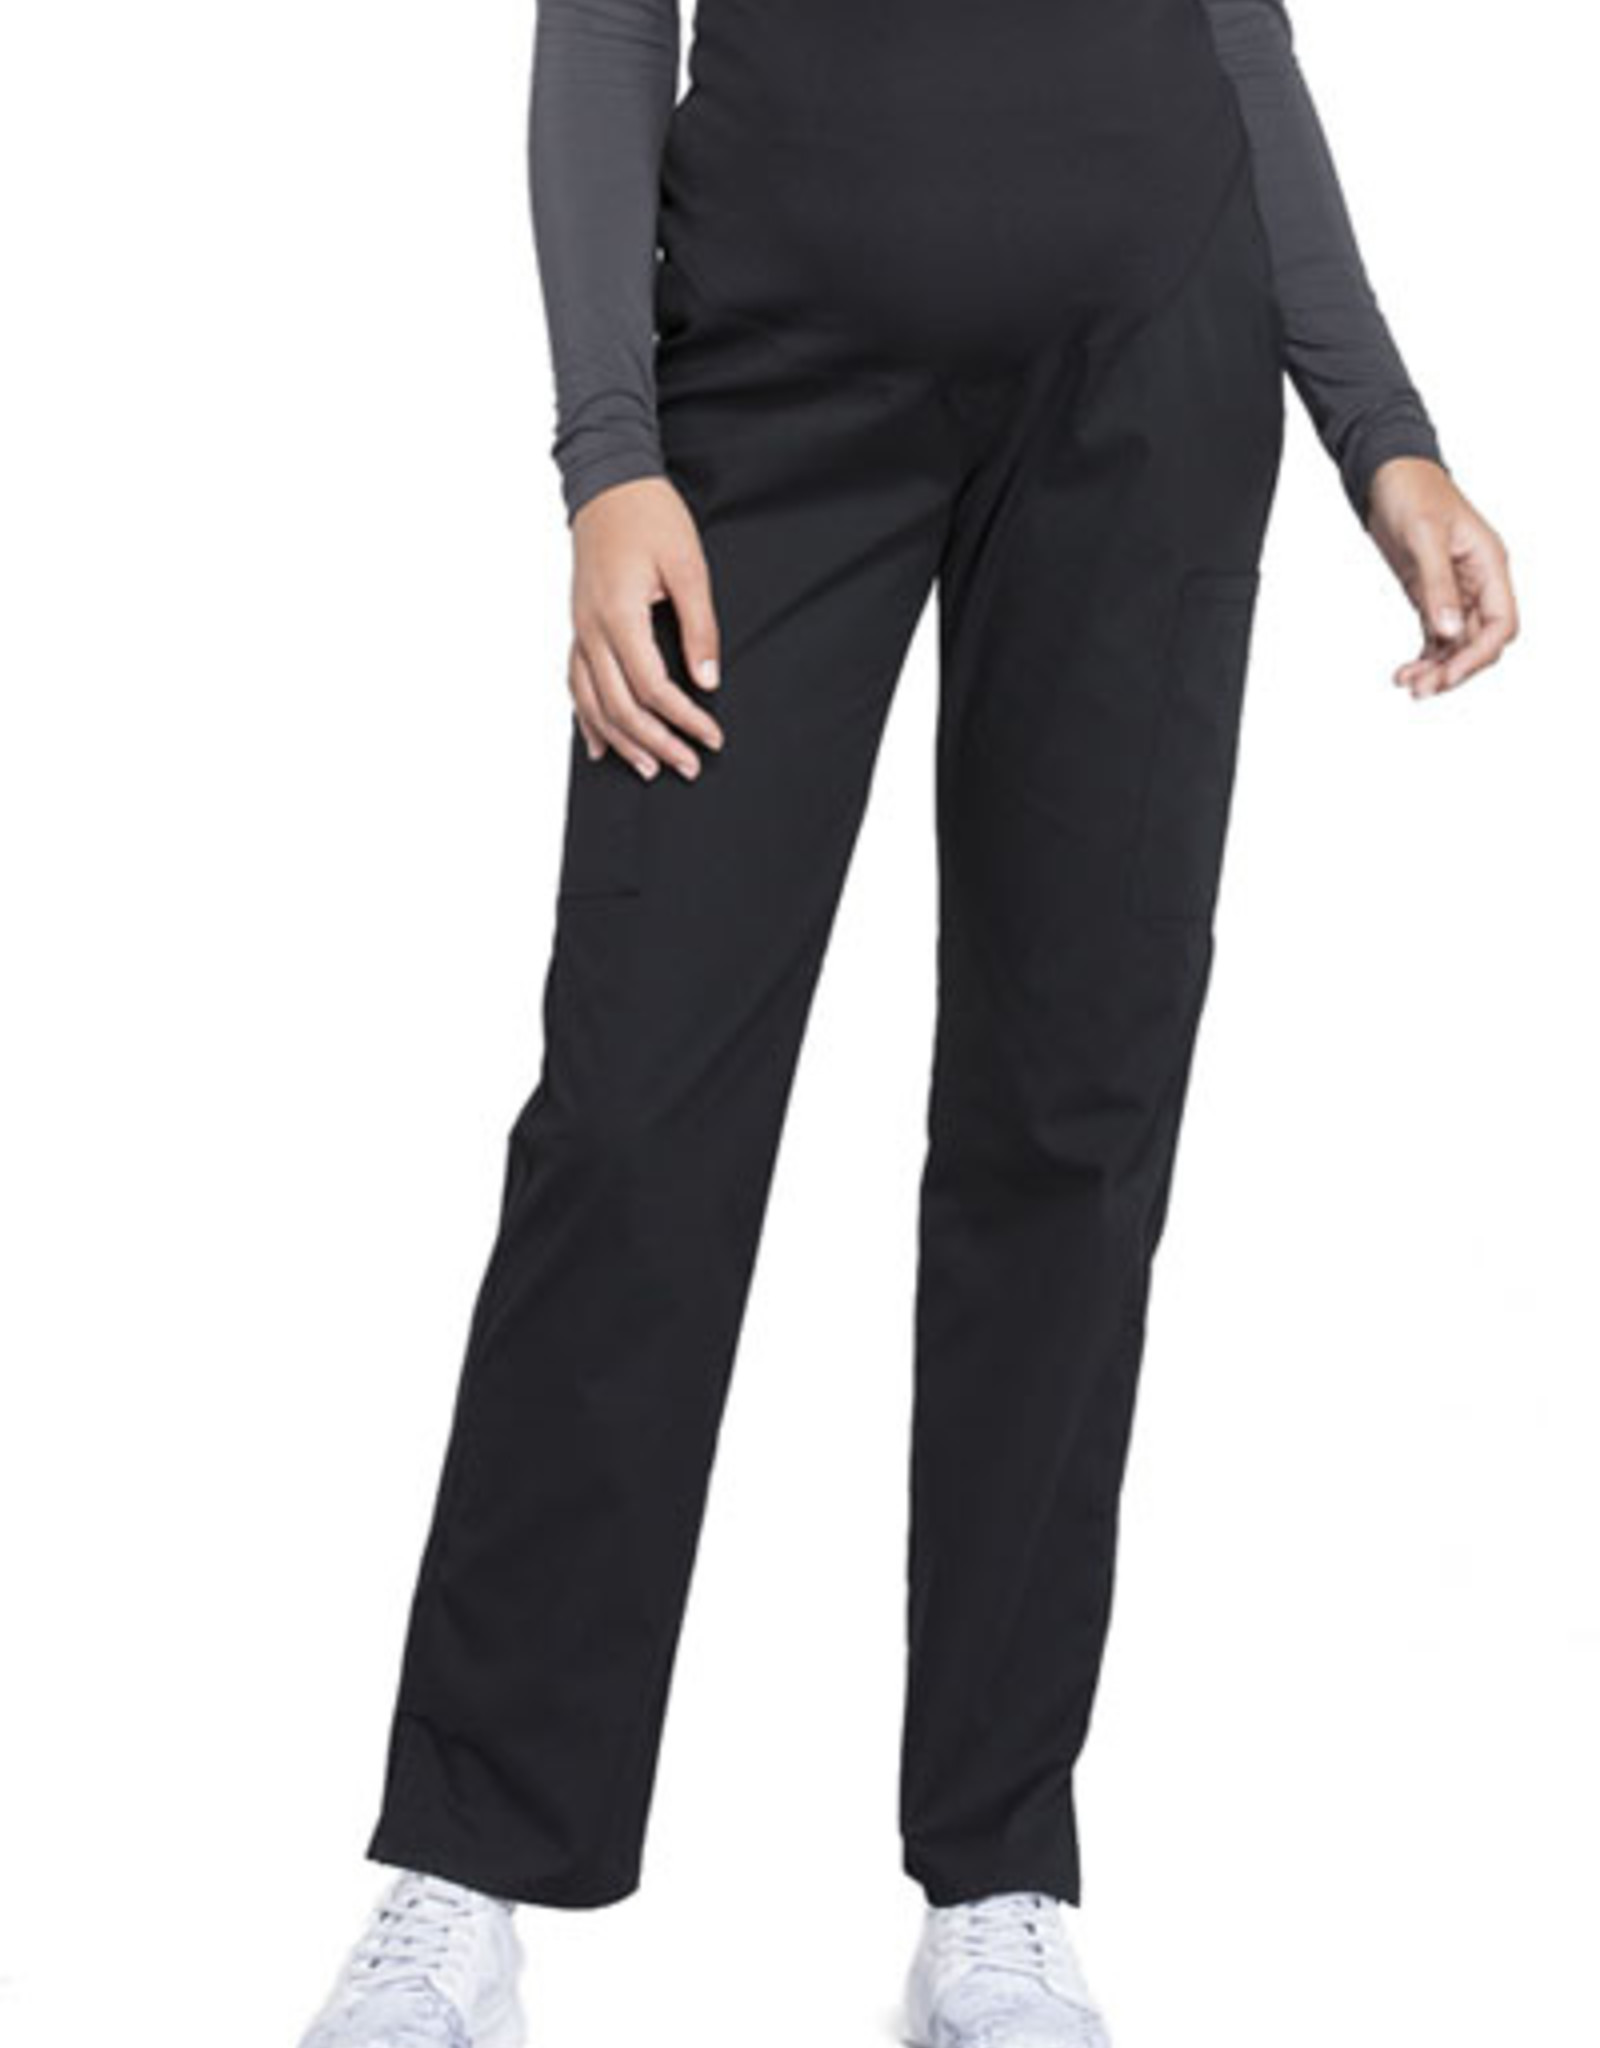 Professionals Women's Maternity Pull-on Pant (PLUS SIZES)